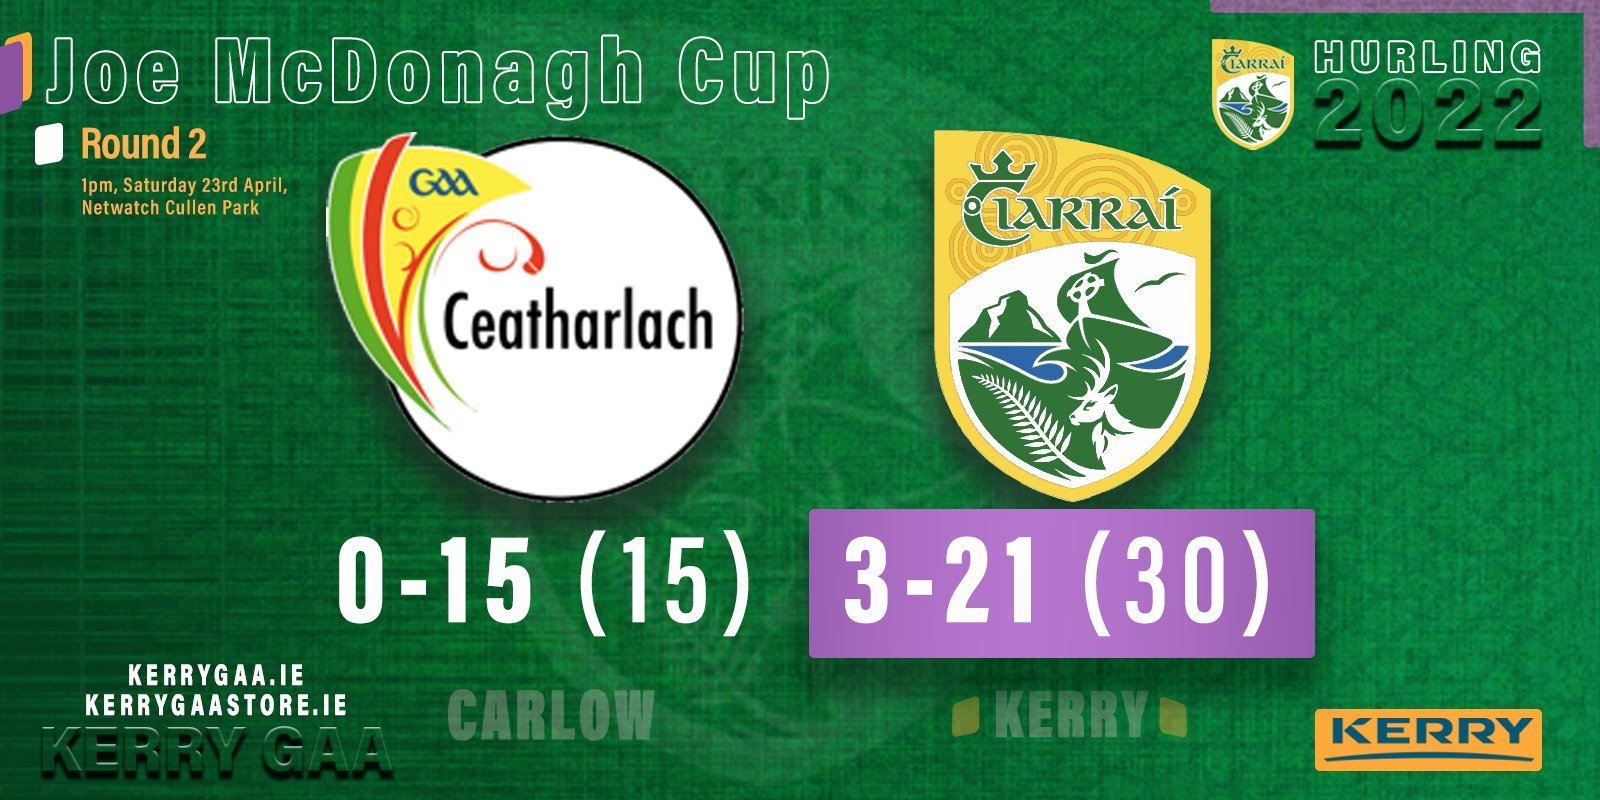 Fantastic win on the road for Kerry Hurlers over Carlow